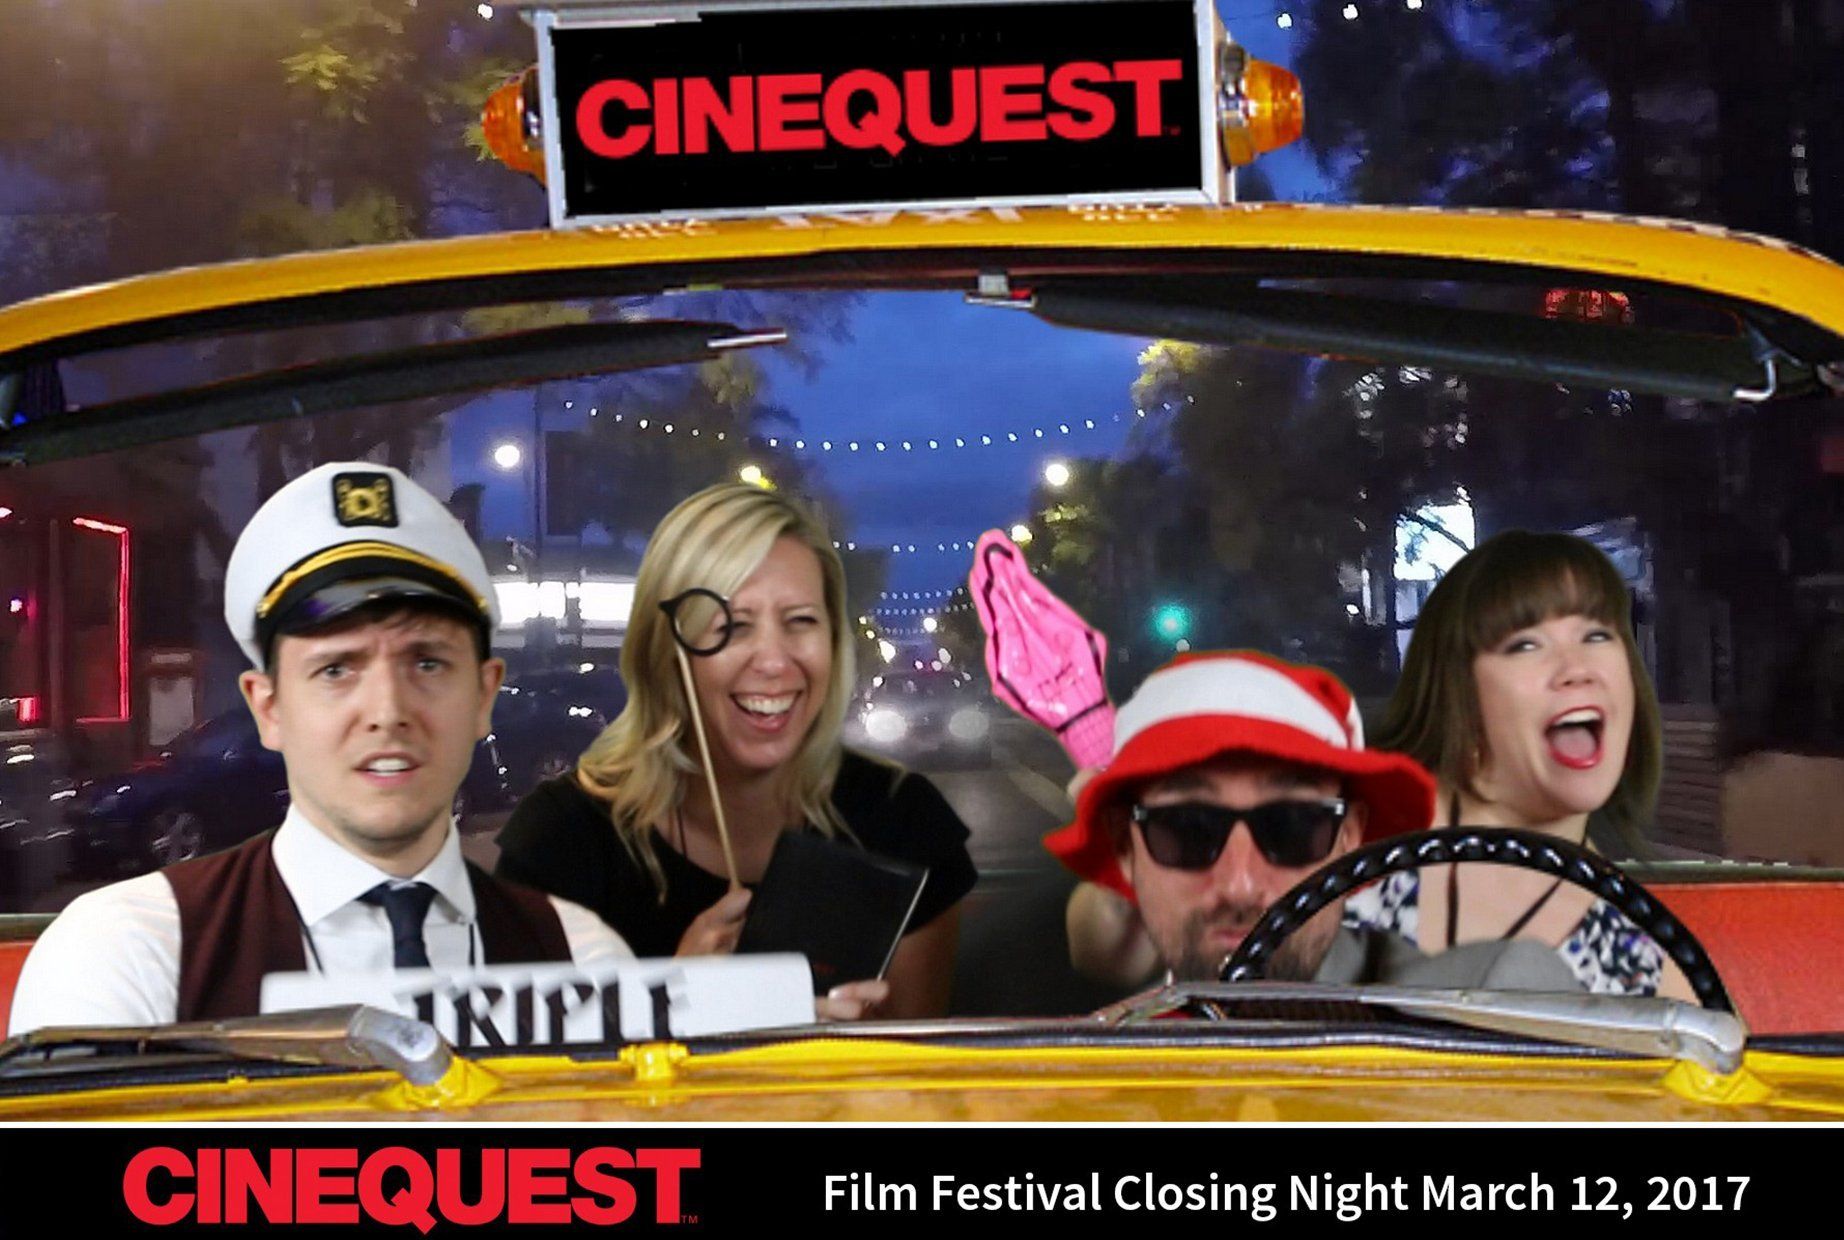 Greenscreen photos from the Cinequest Film Festival in San Jose, CA